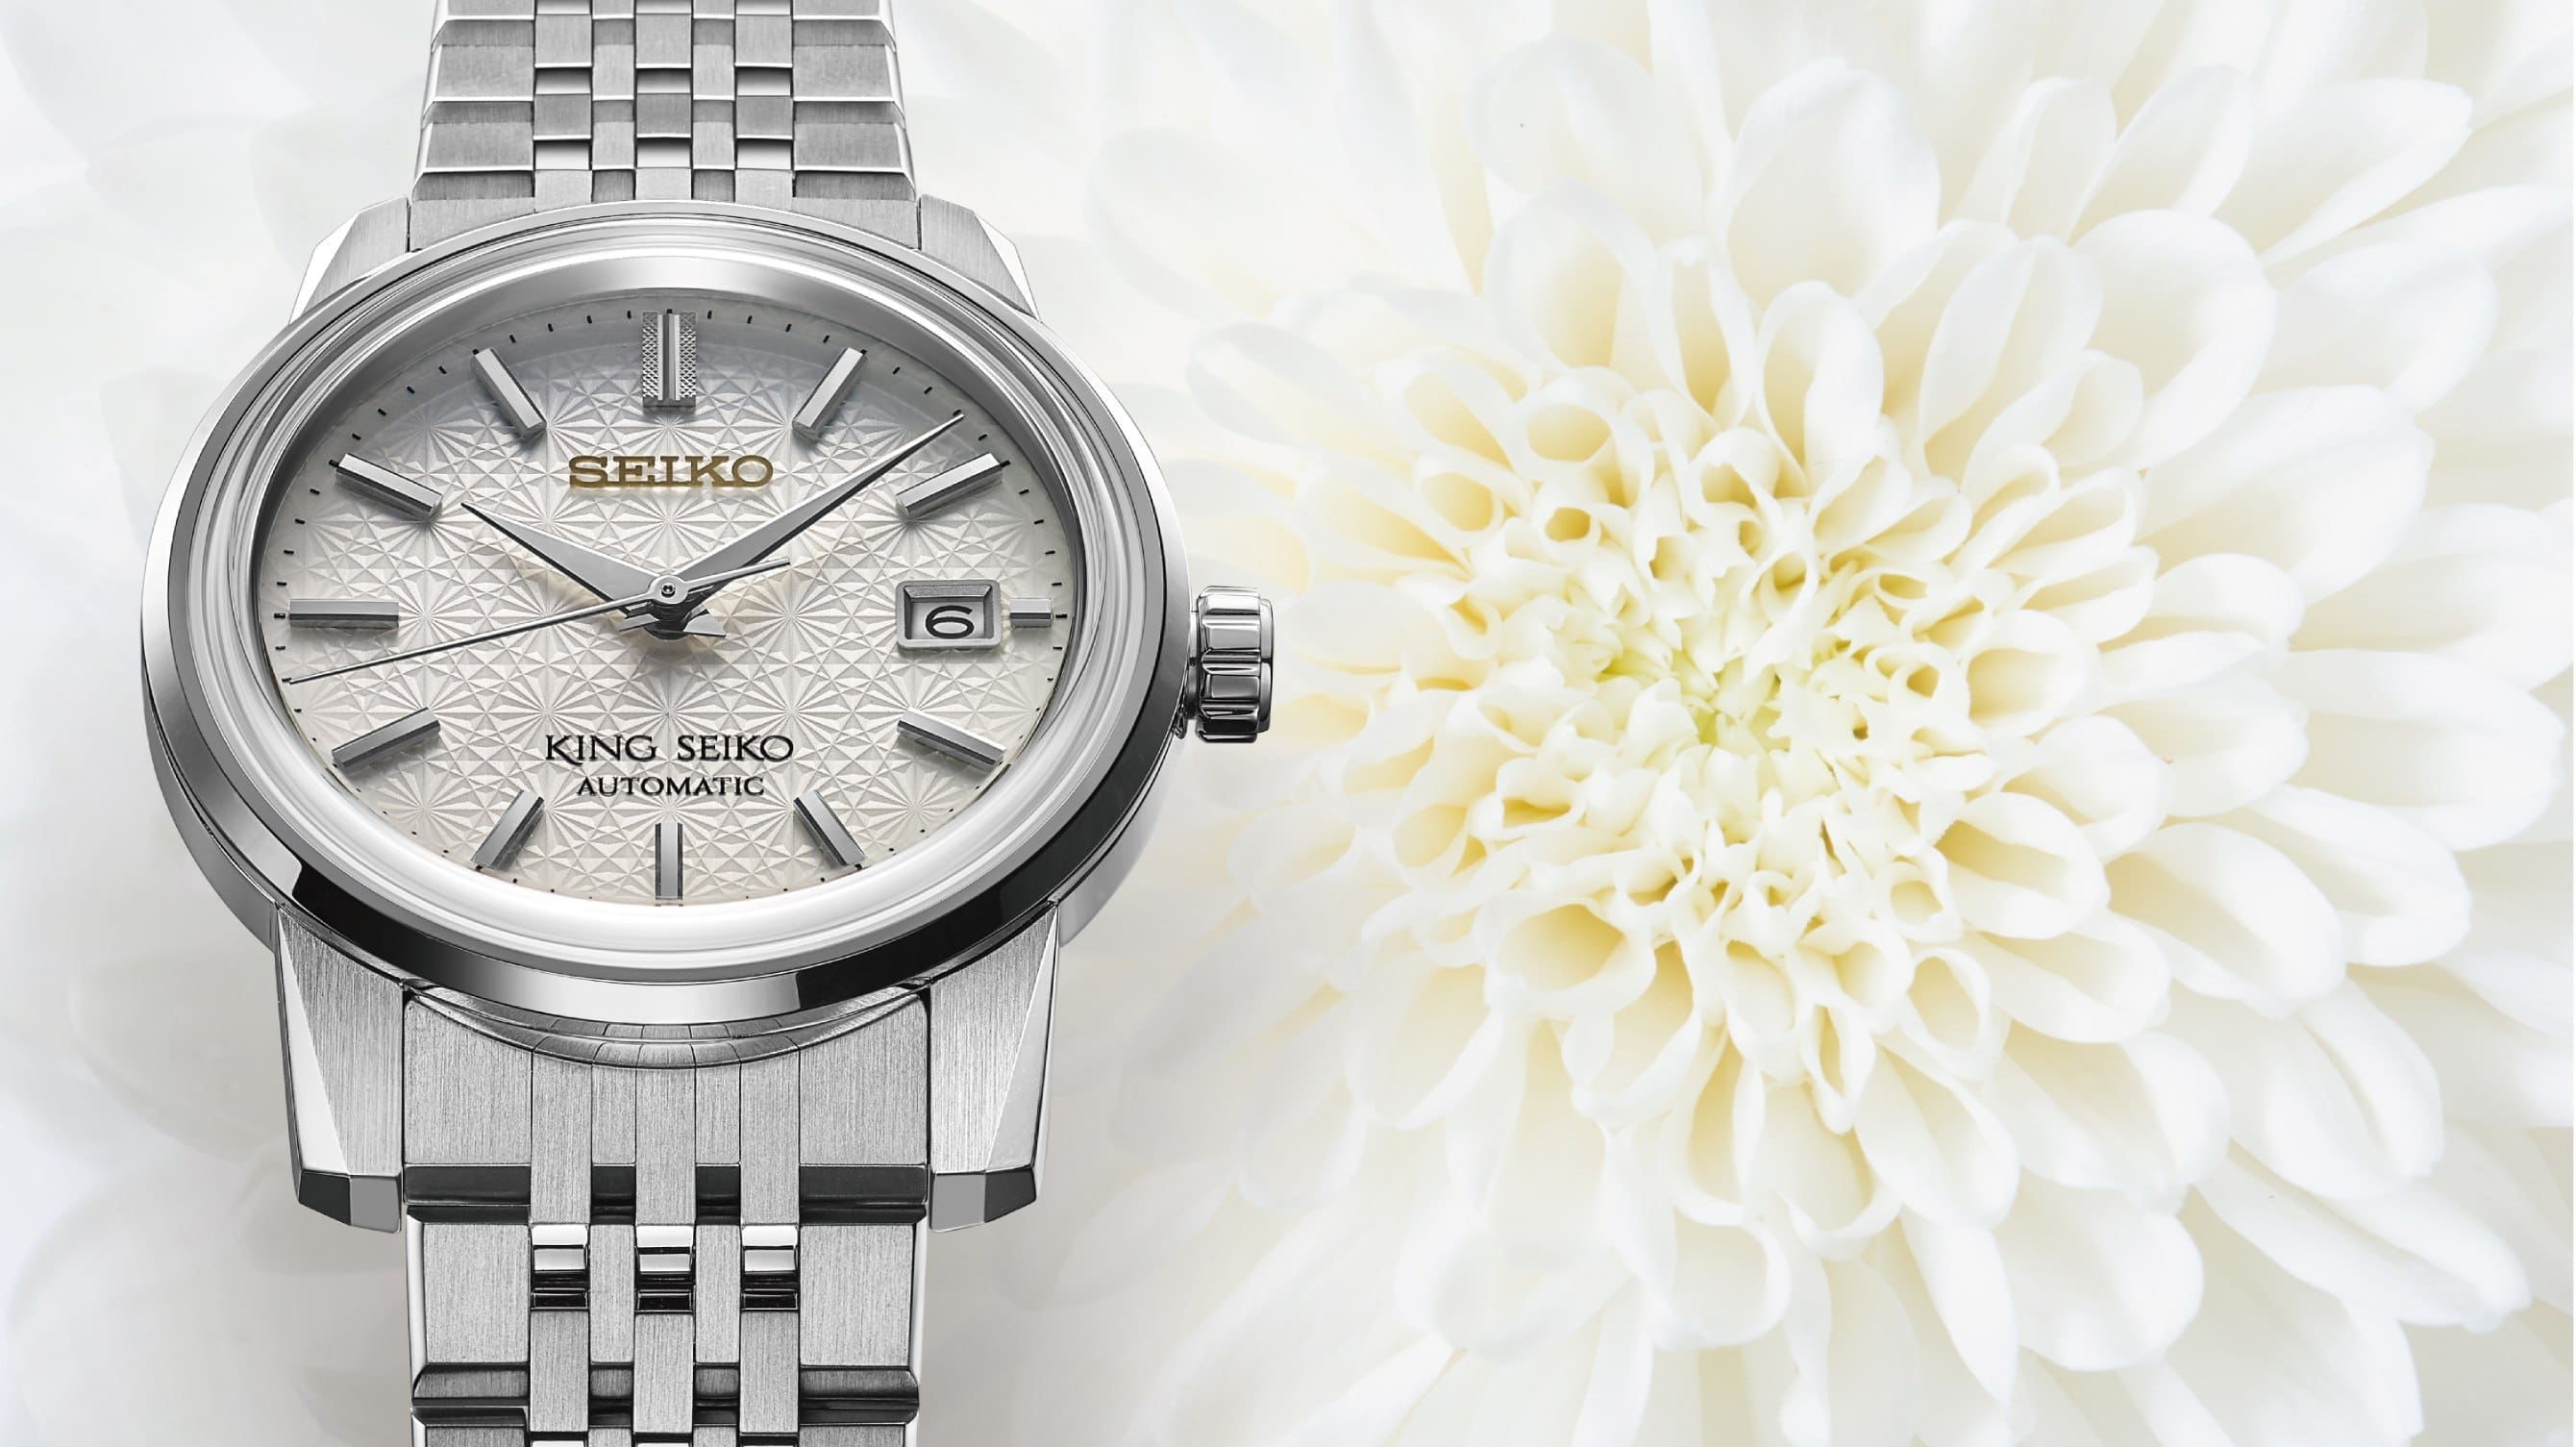 The King Seiko SJE095 takes its dial inspiration from Japan’s national flower